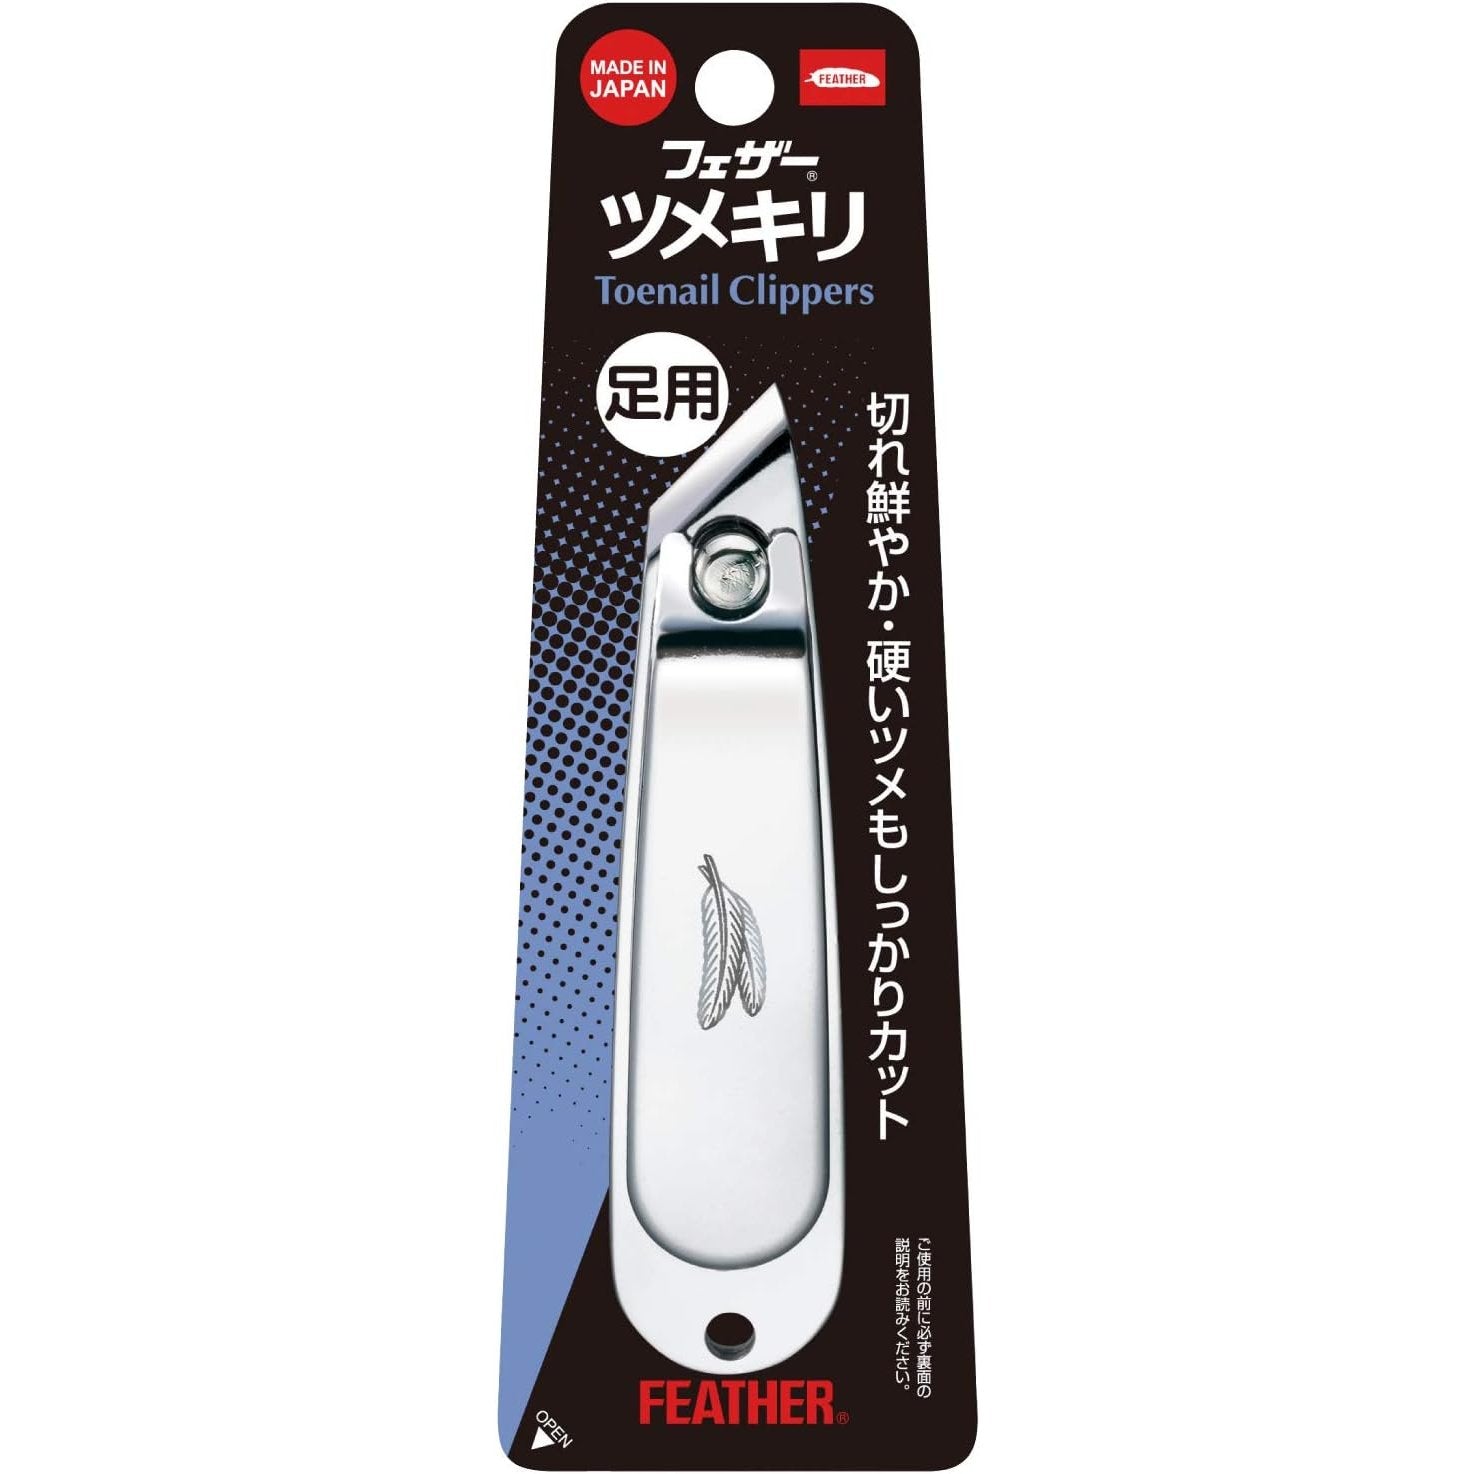 6 Best Tried and True Japanese Dog Nail Clippers (Petio, Lavuky, and More)  - YouTube